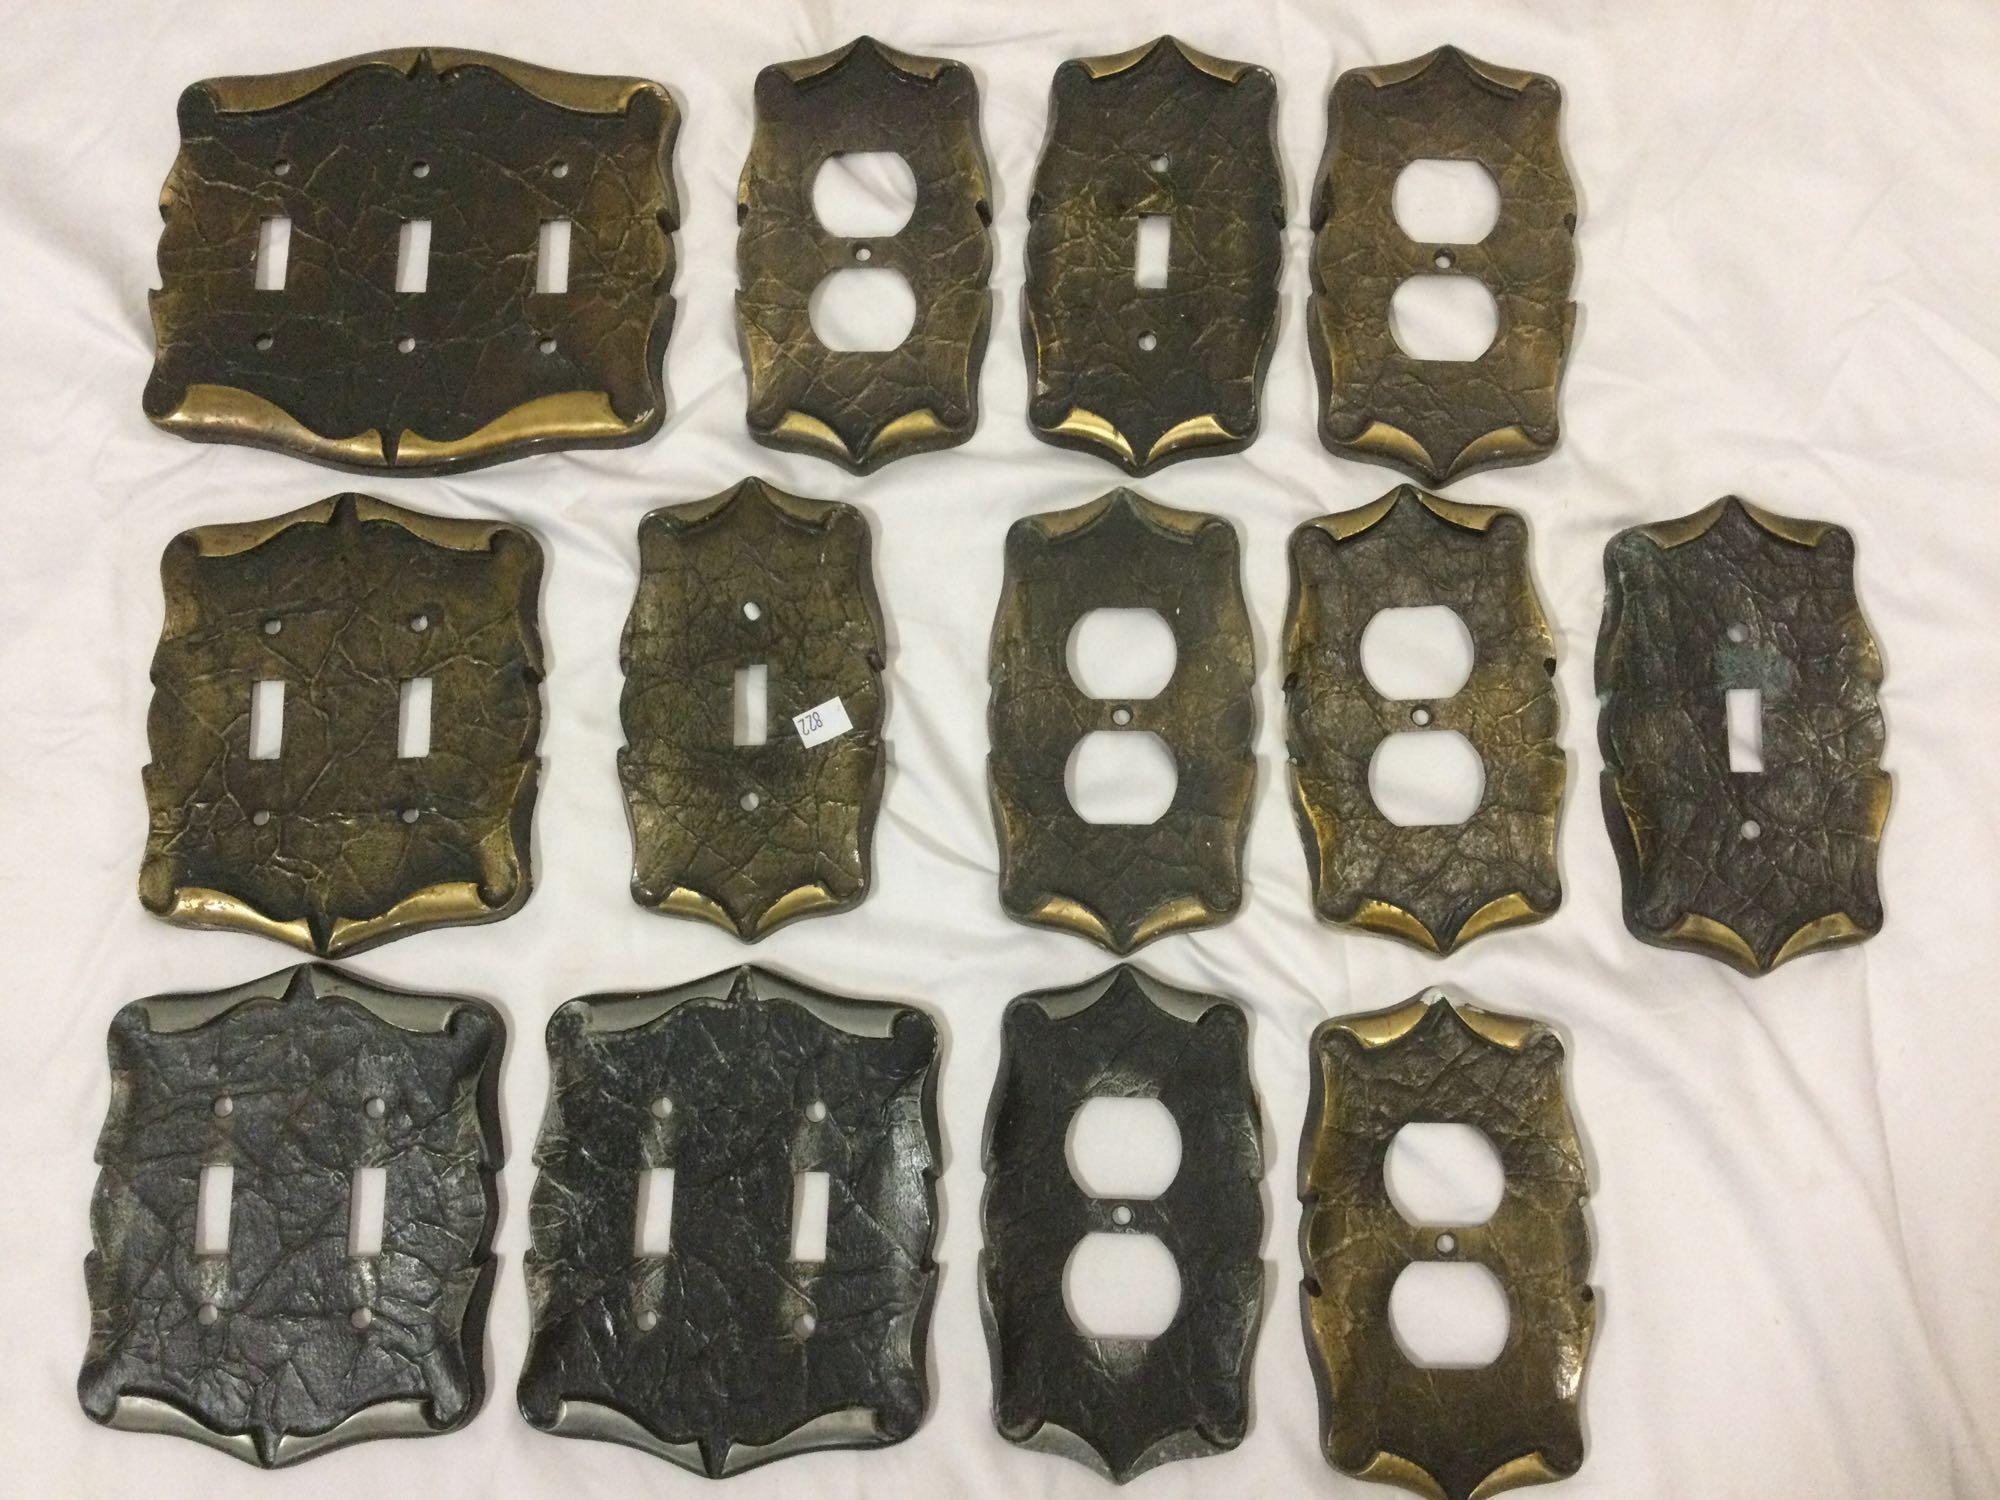 13 pc. Lot of metal light switch plates, outlet covers, approx 7 x 6 in. largest.